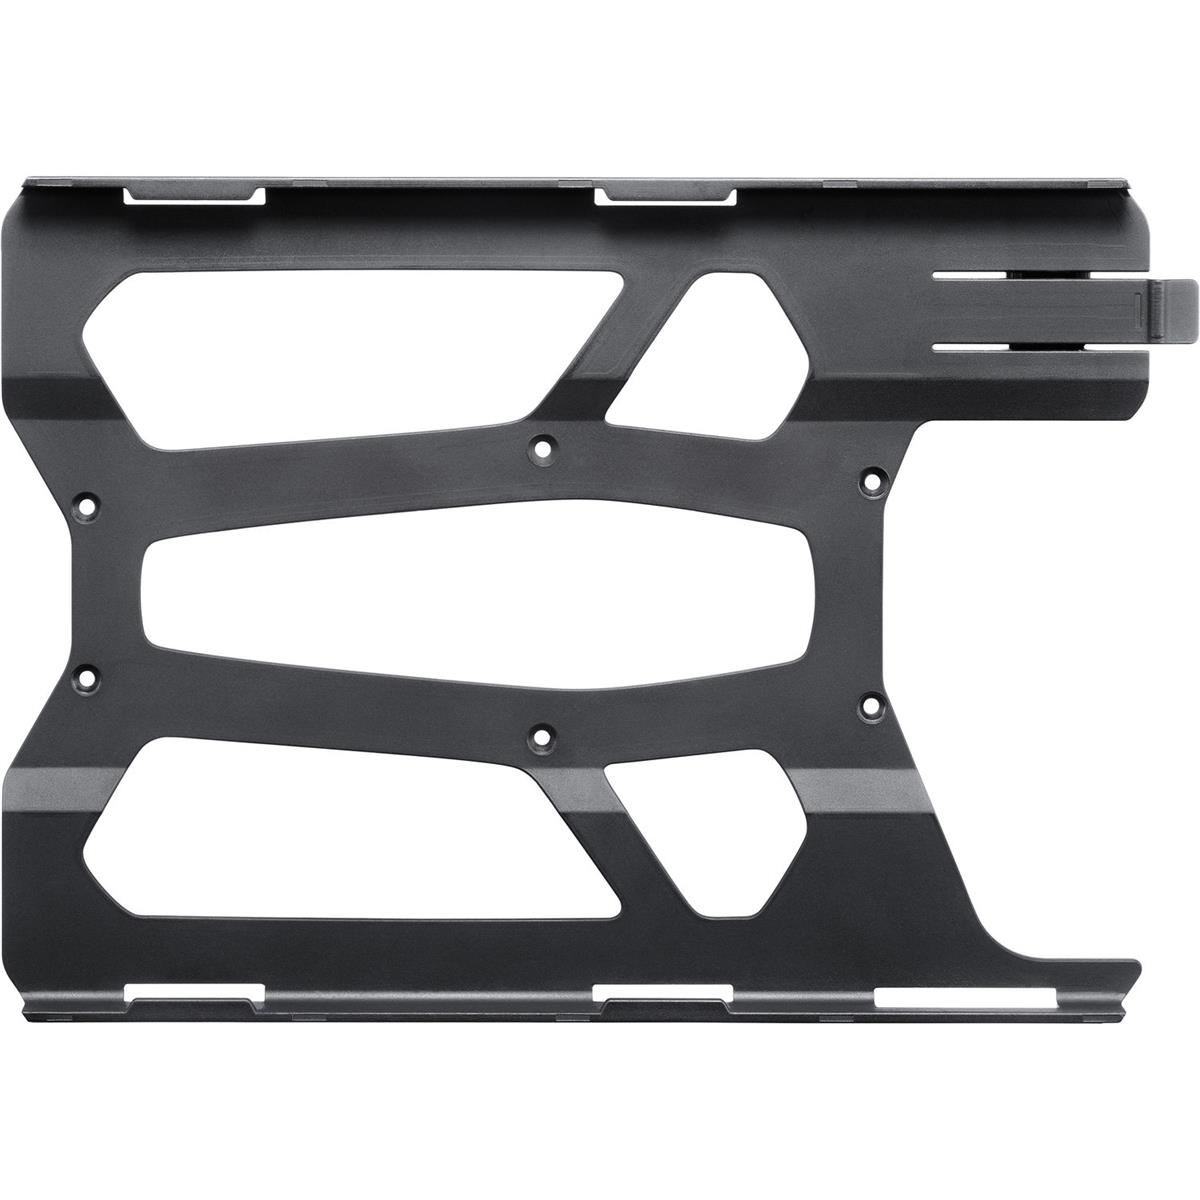 Image of Manfrotto Digital Director Frame for iPad Air 2